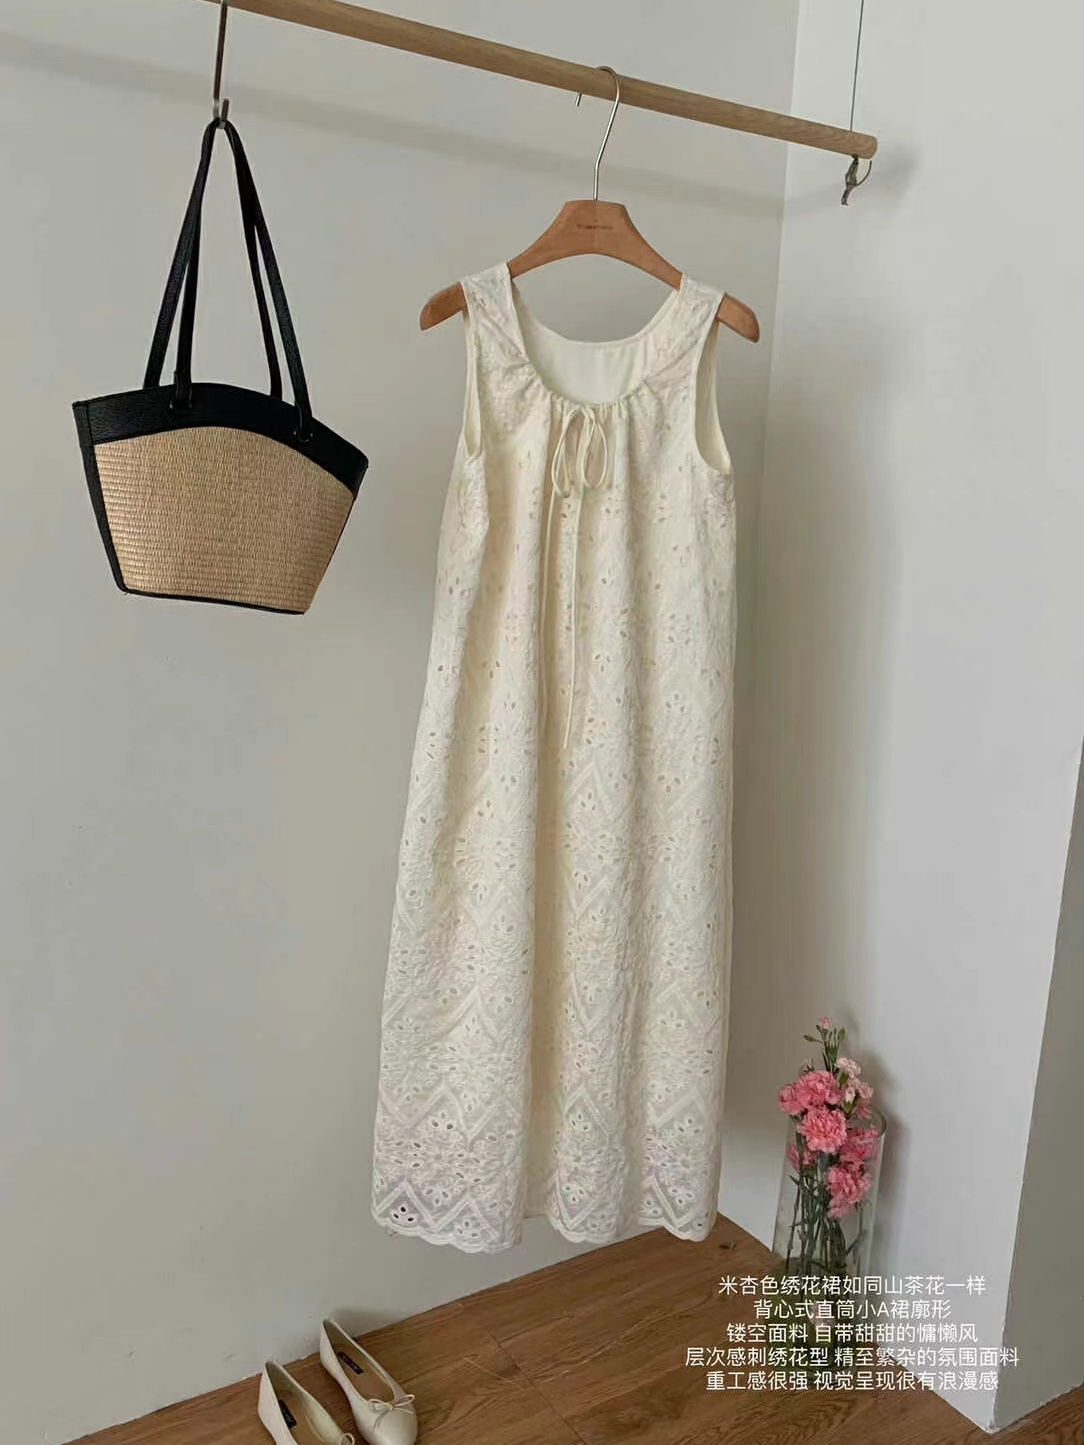 Round neck tied embroidered sleeveless dress loose temperament fresh travel style artistic style Korean style long dress